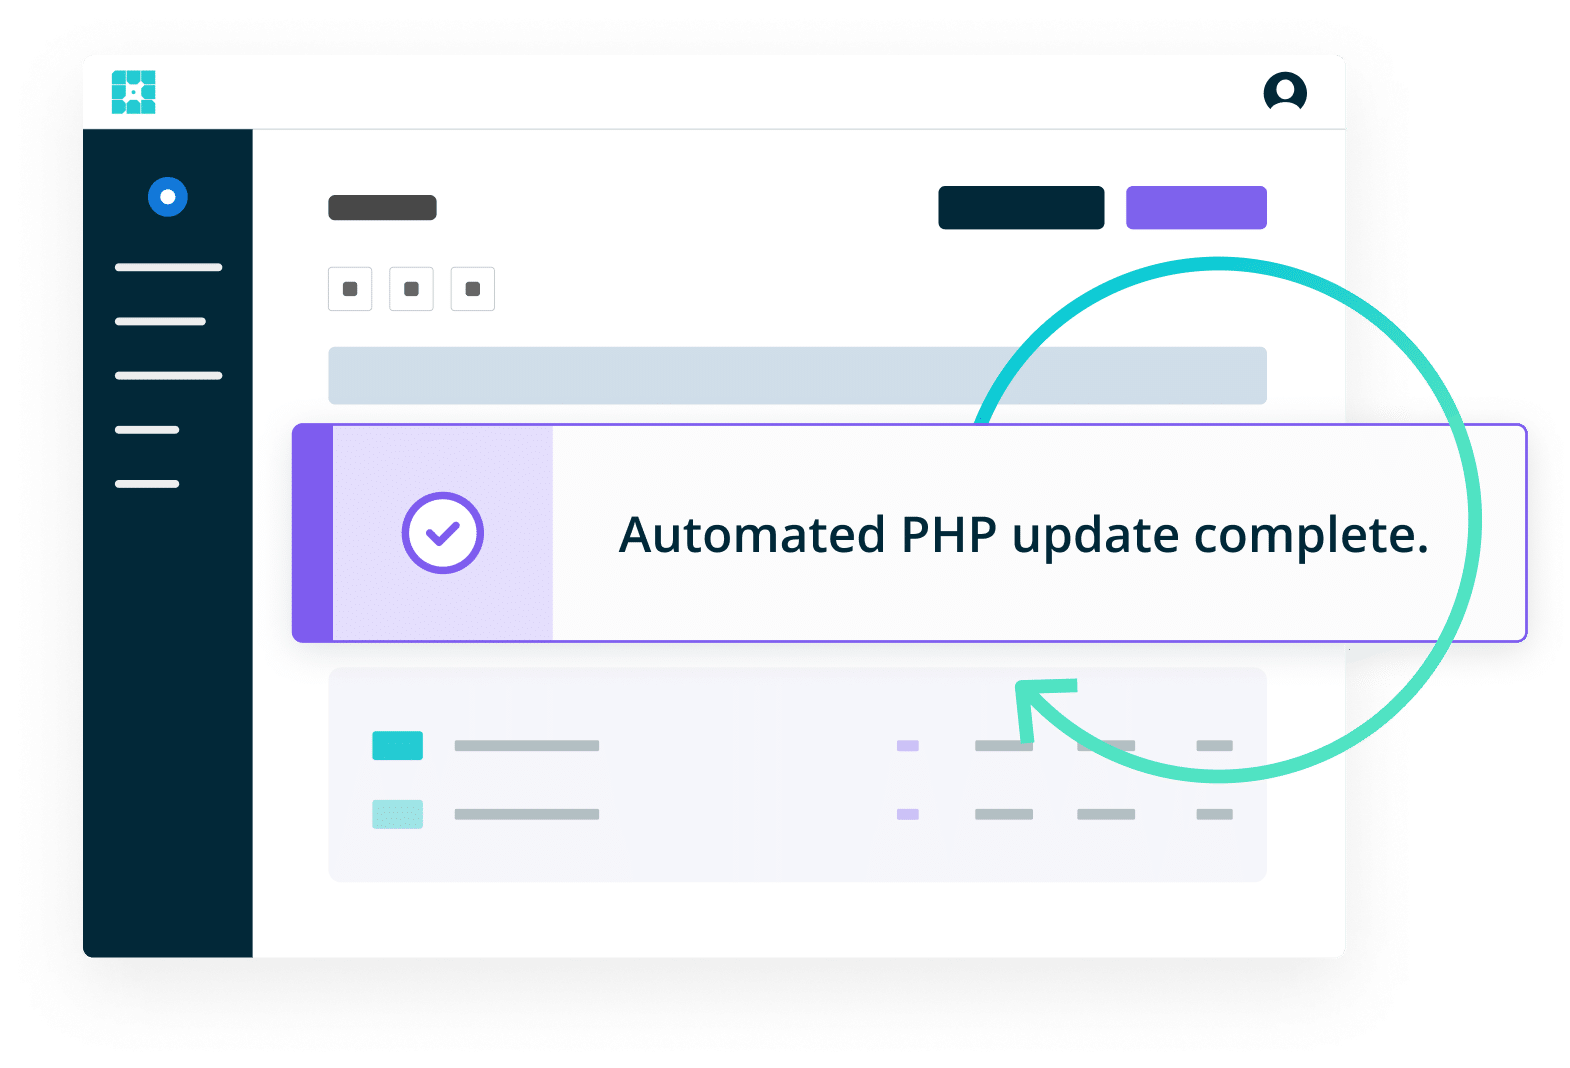 Automated PHP update complete